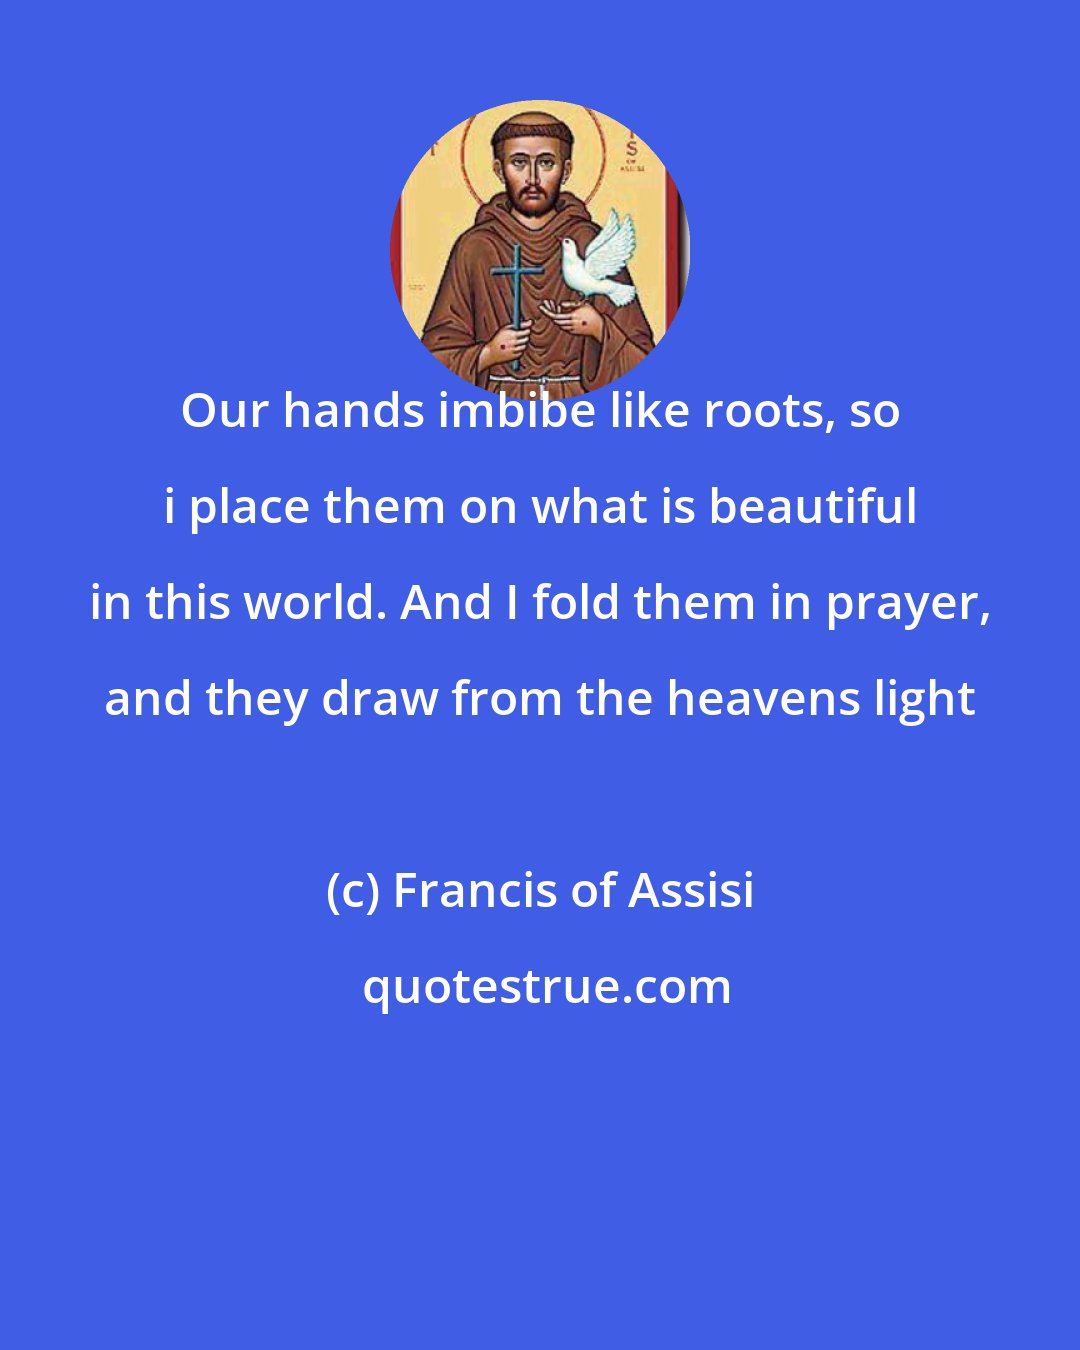 Francis of Assisi: Our hands imbibe like roots, so i place them on what is beautiful in this world. And I fold them in prayer, and they draw from the heavens light